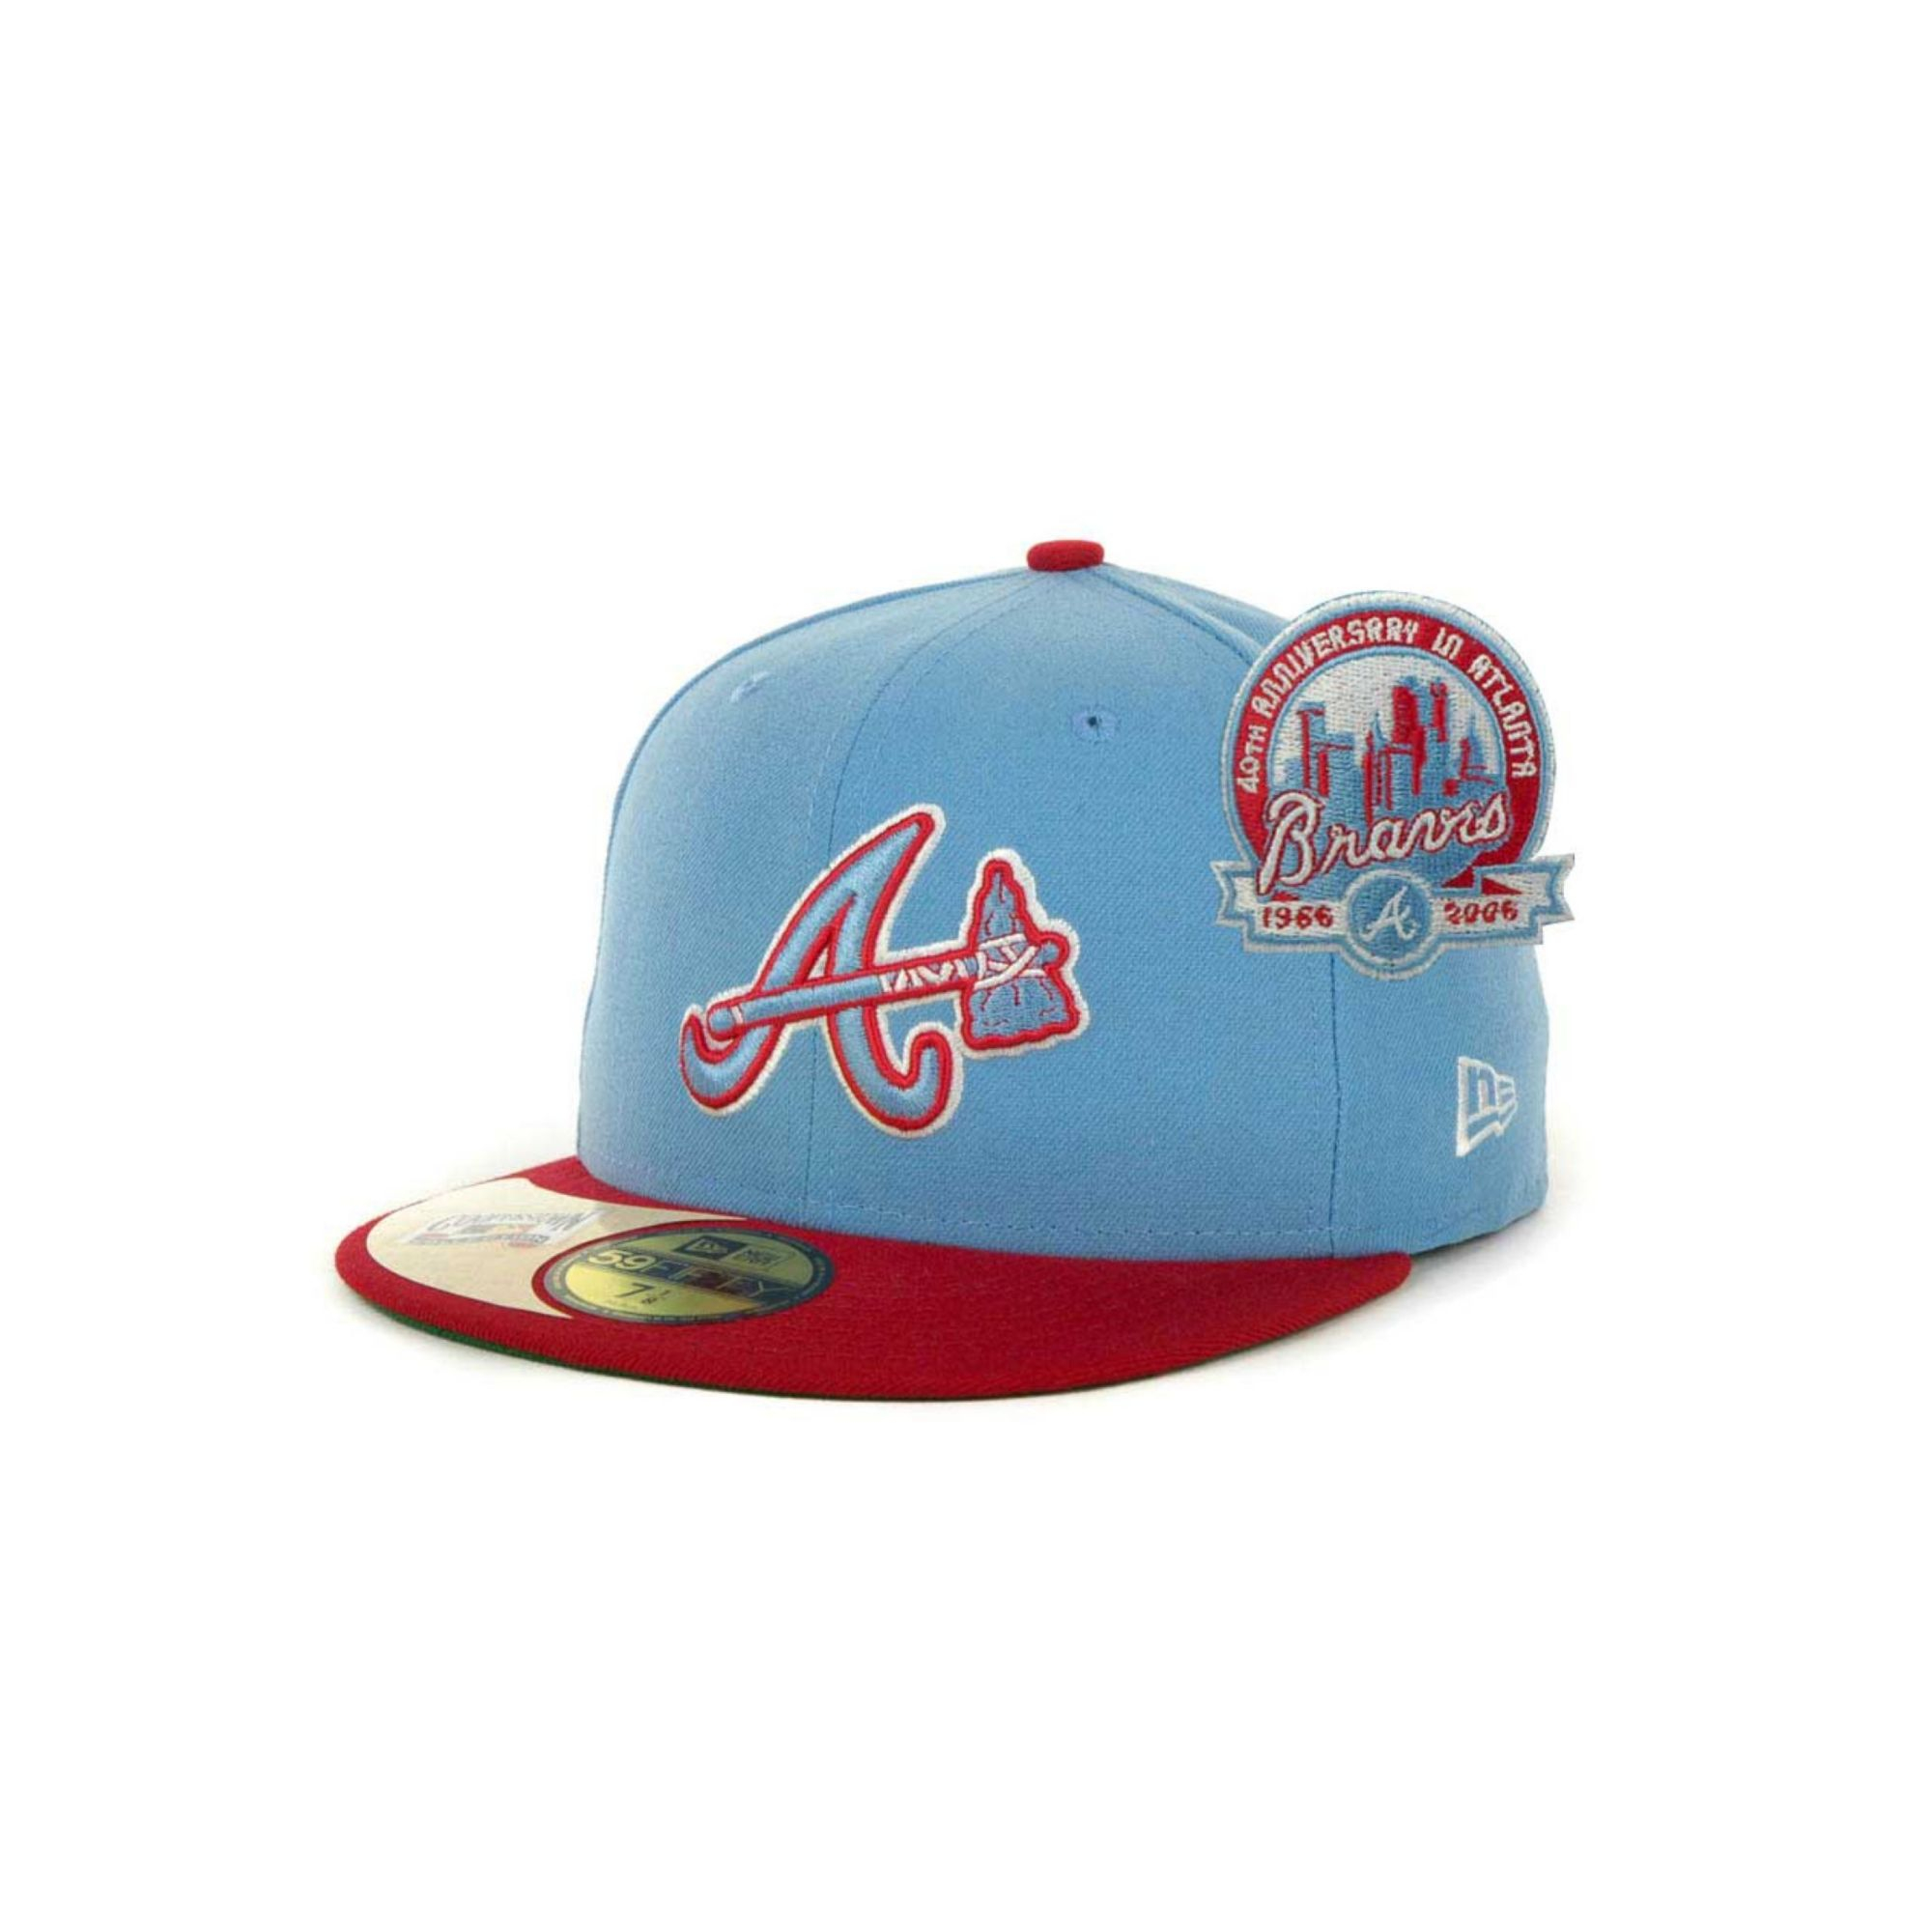 https://cdna.lystit.com/photos/e431-2014/01/30/new-era-red-atlanta-braves-cooperstown-patch-59fifty-cap-product-1-16551650-0-866788604-normal.jpeg